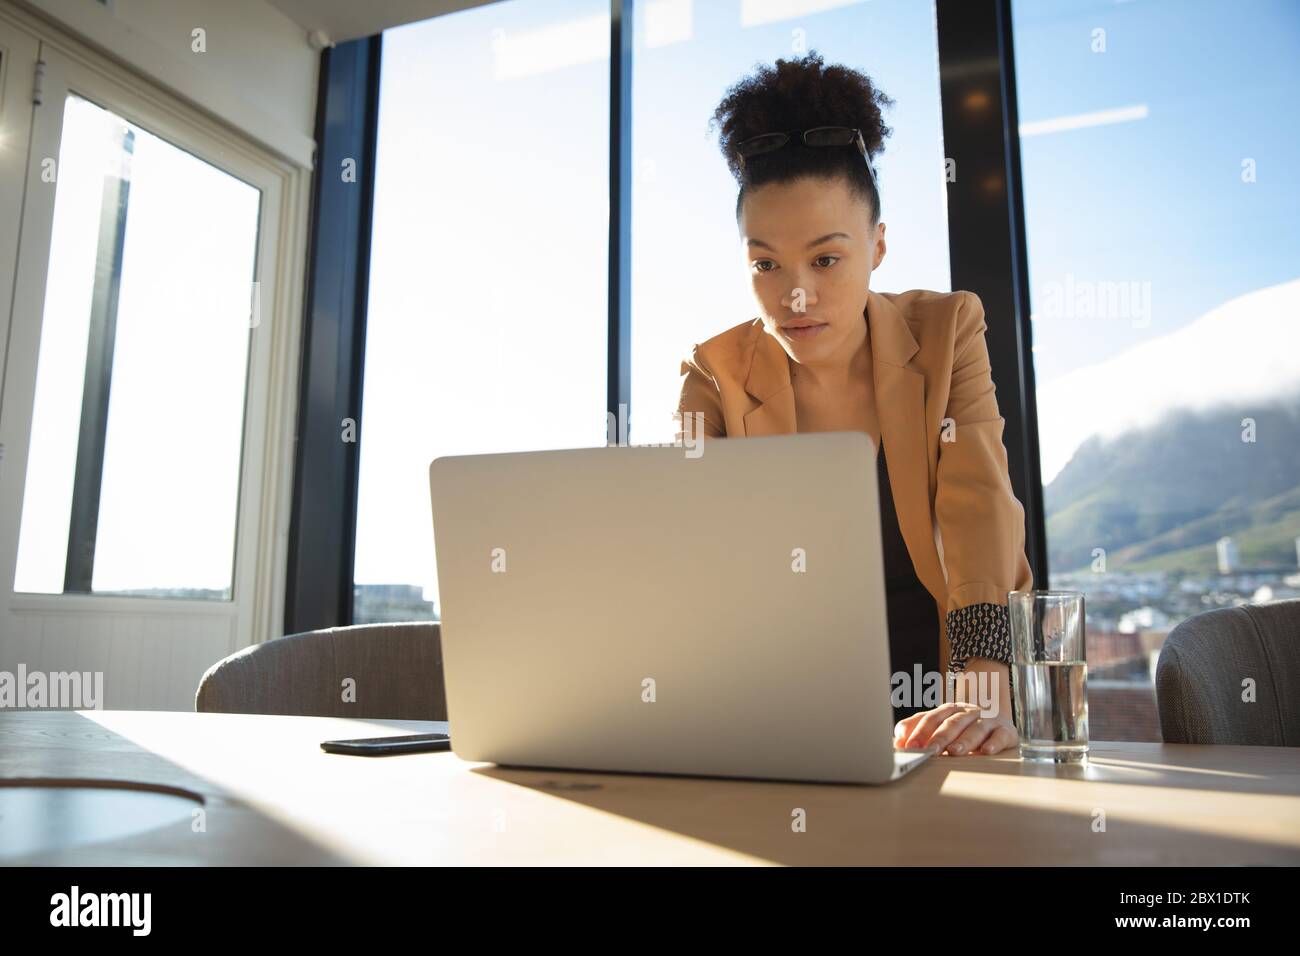 Mixed raced business woman using her laptop Stock Photo